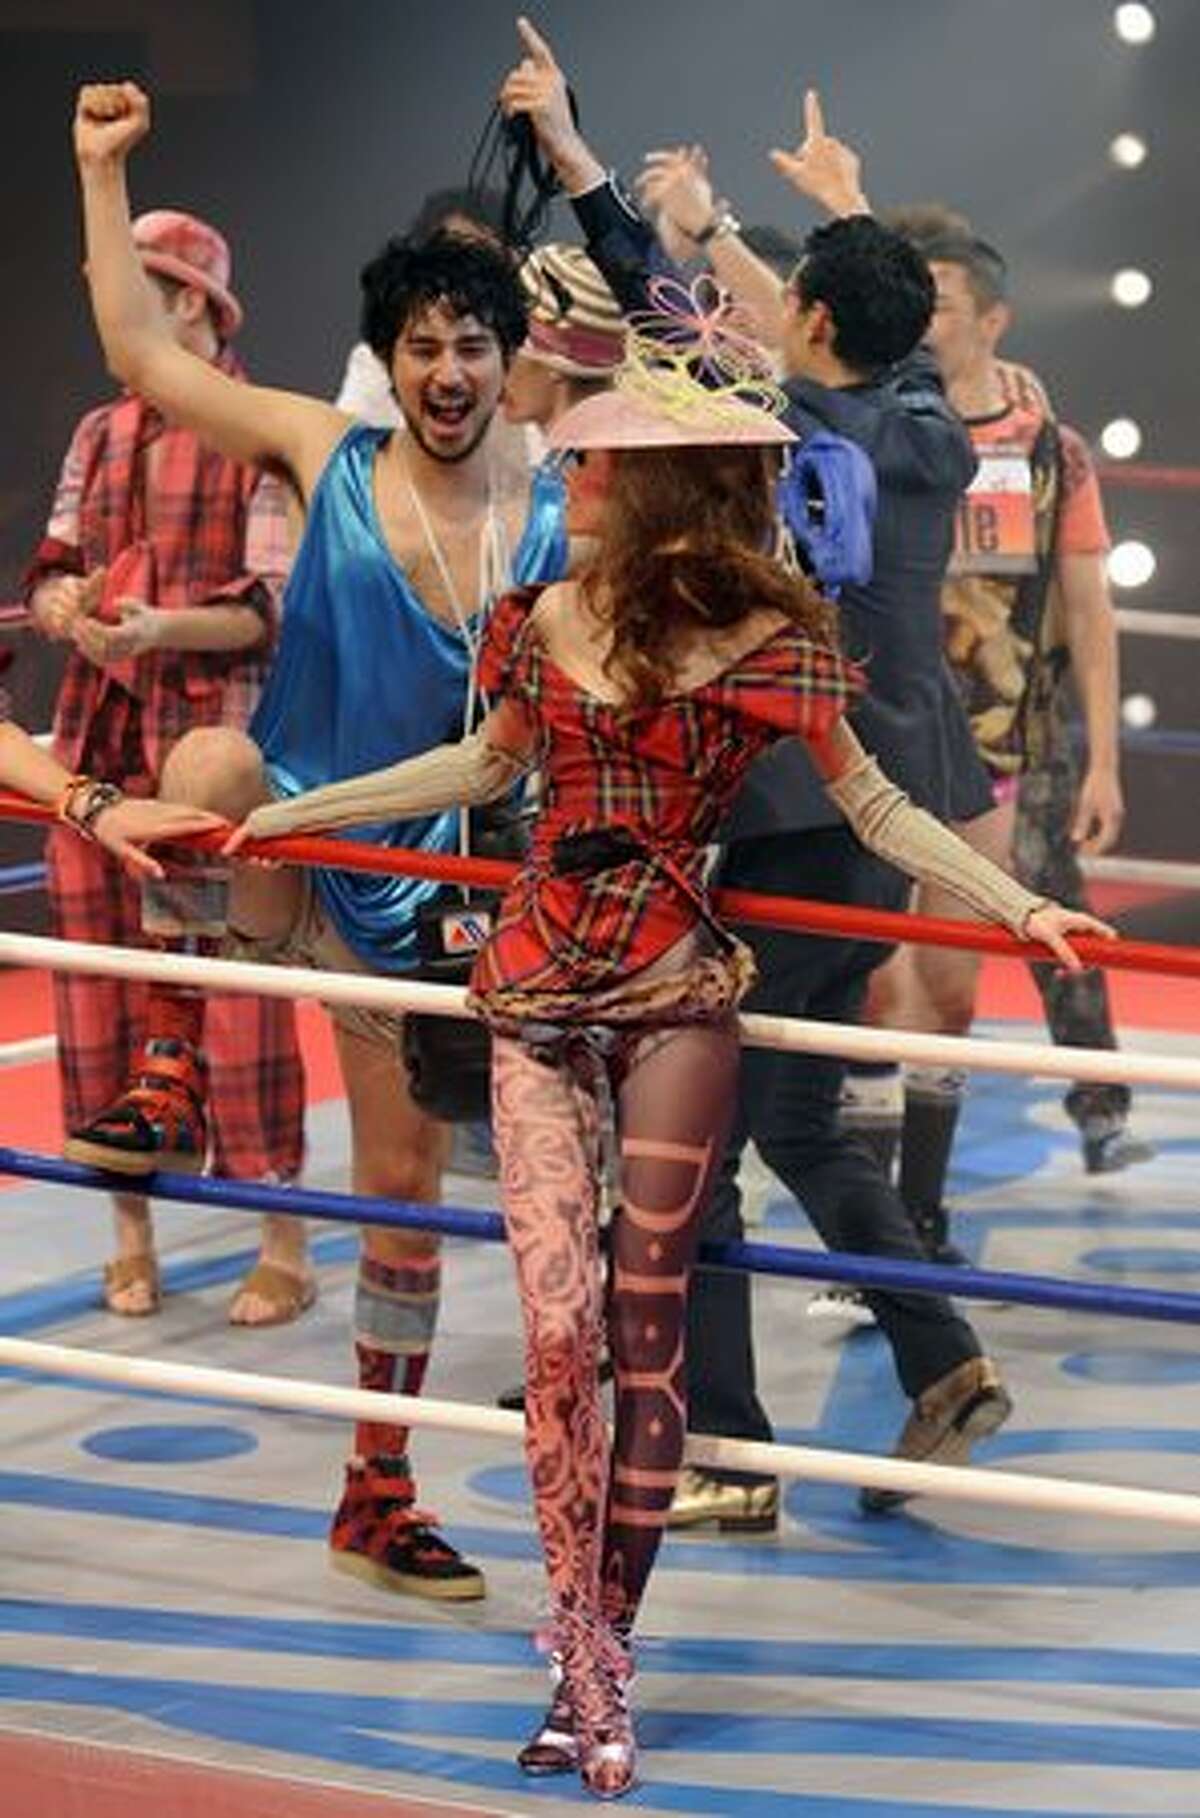 Models celebrate the finale of the fashion show of British designer Vivienne Westwood at a boxing stadium in Tokyo.